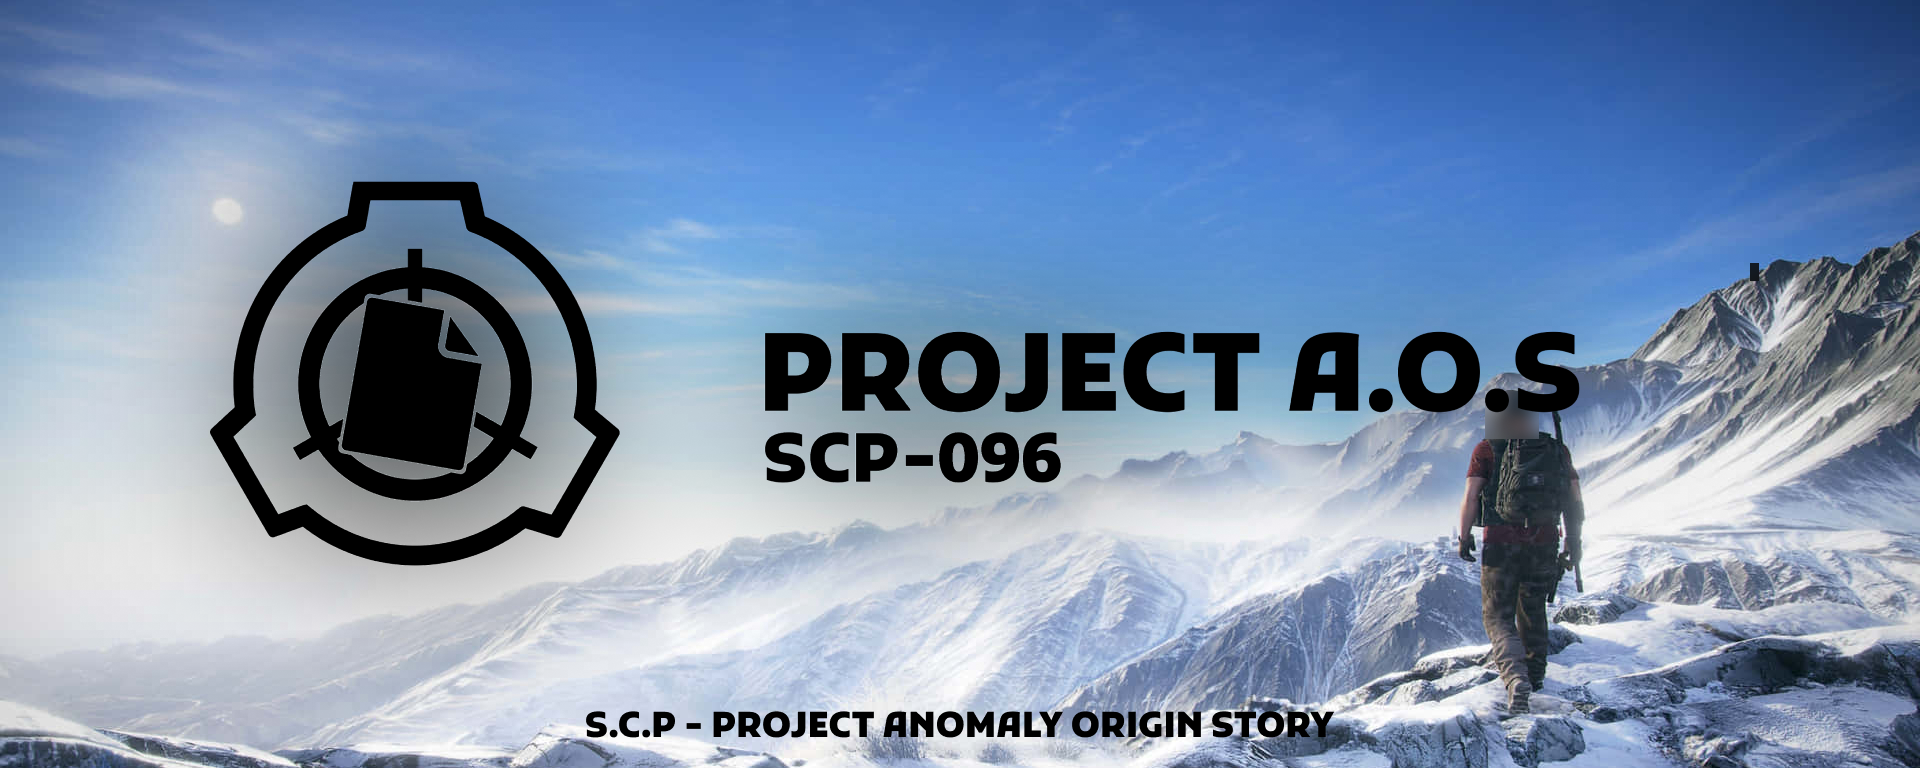 PROJECT A.O.S - SCP-096